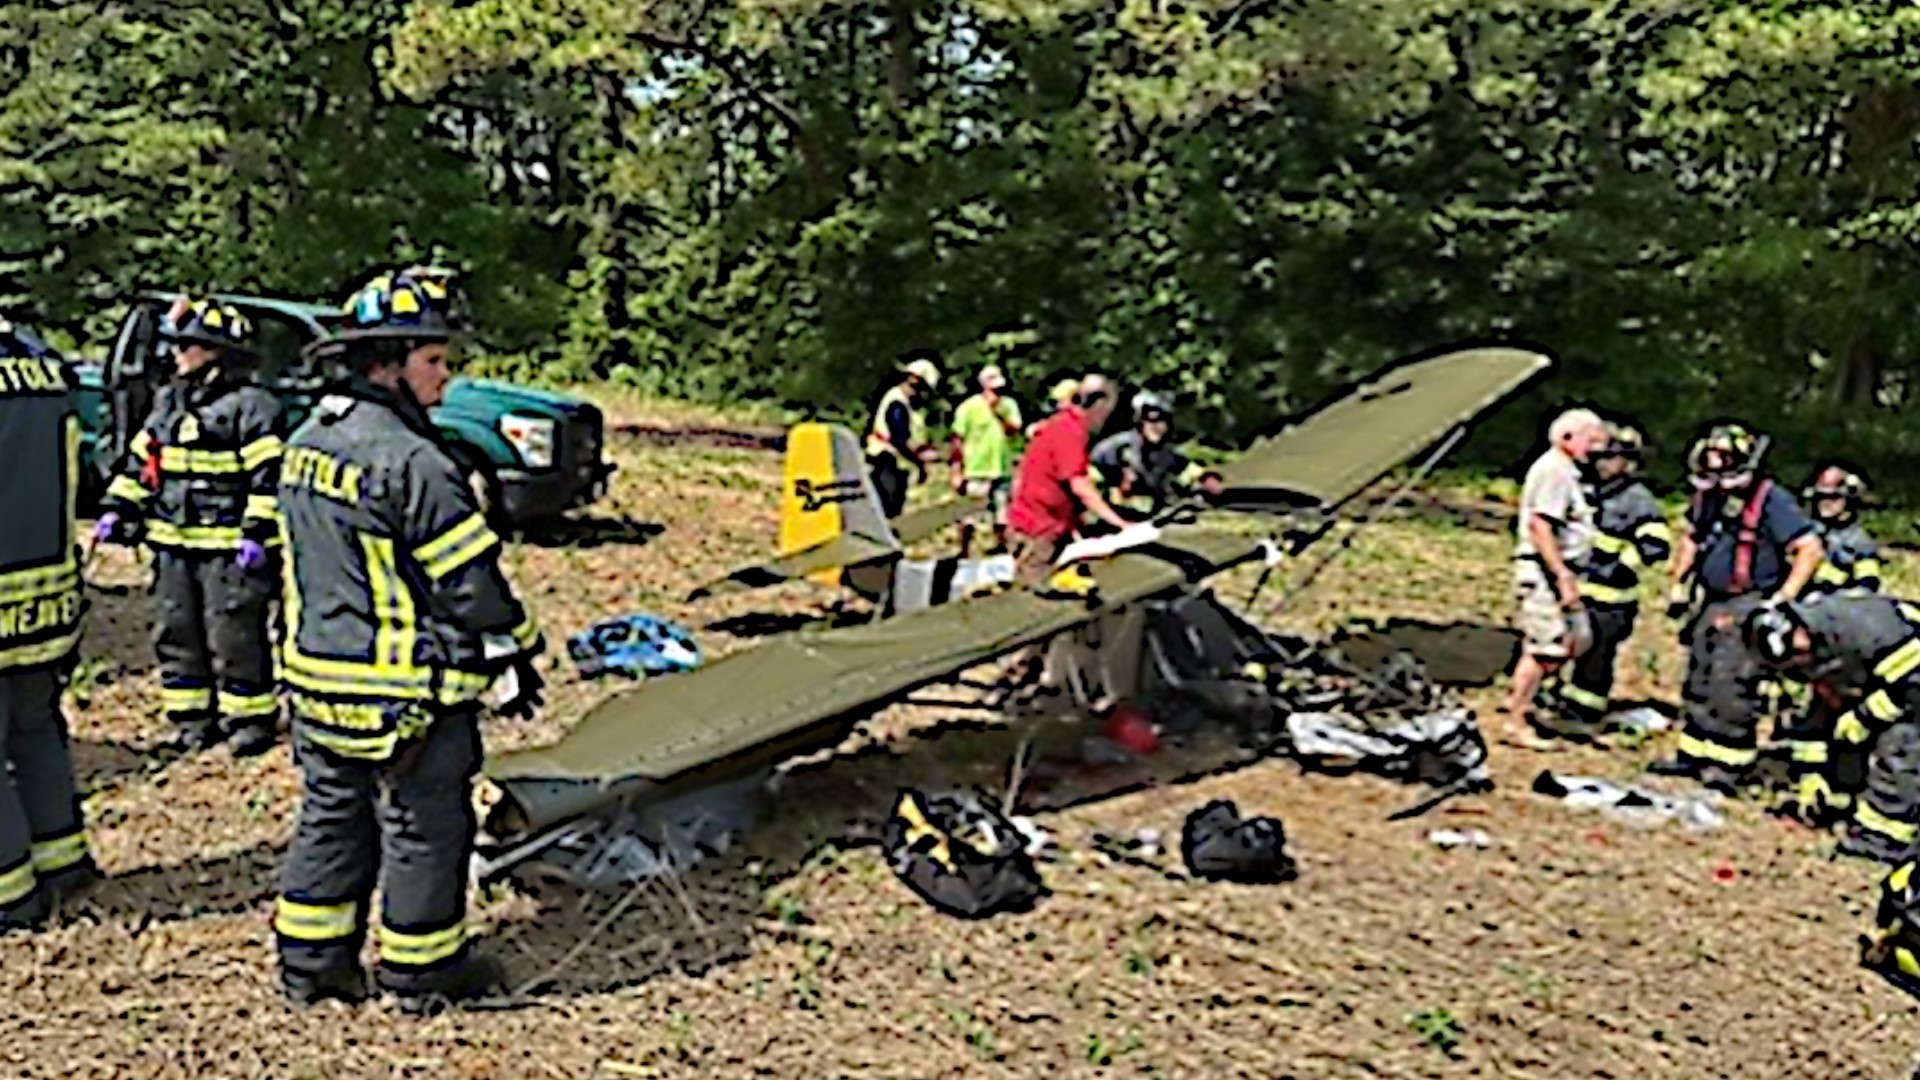 The plane went down in a rural area south of the downtown section of the city on North Liberty Spring Road shortly before 3 p.m.